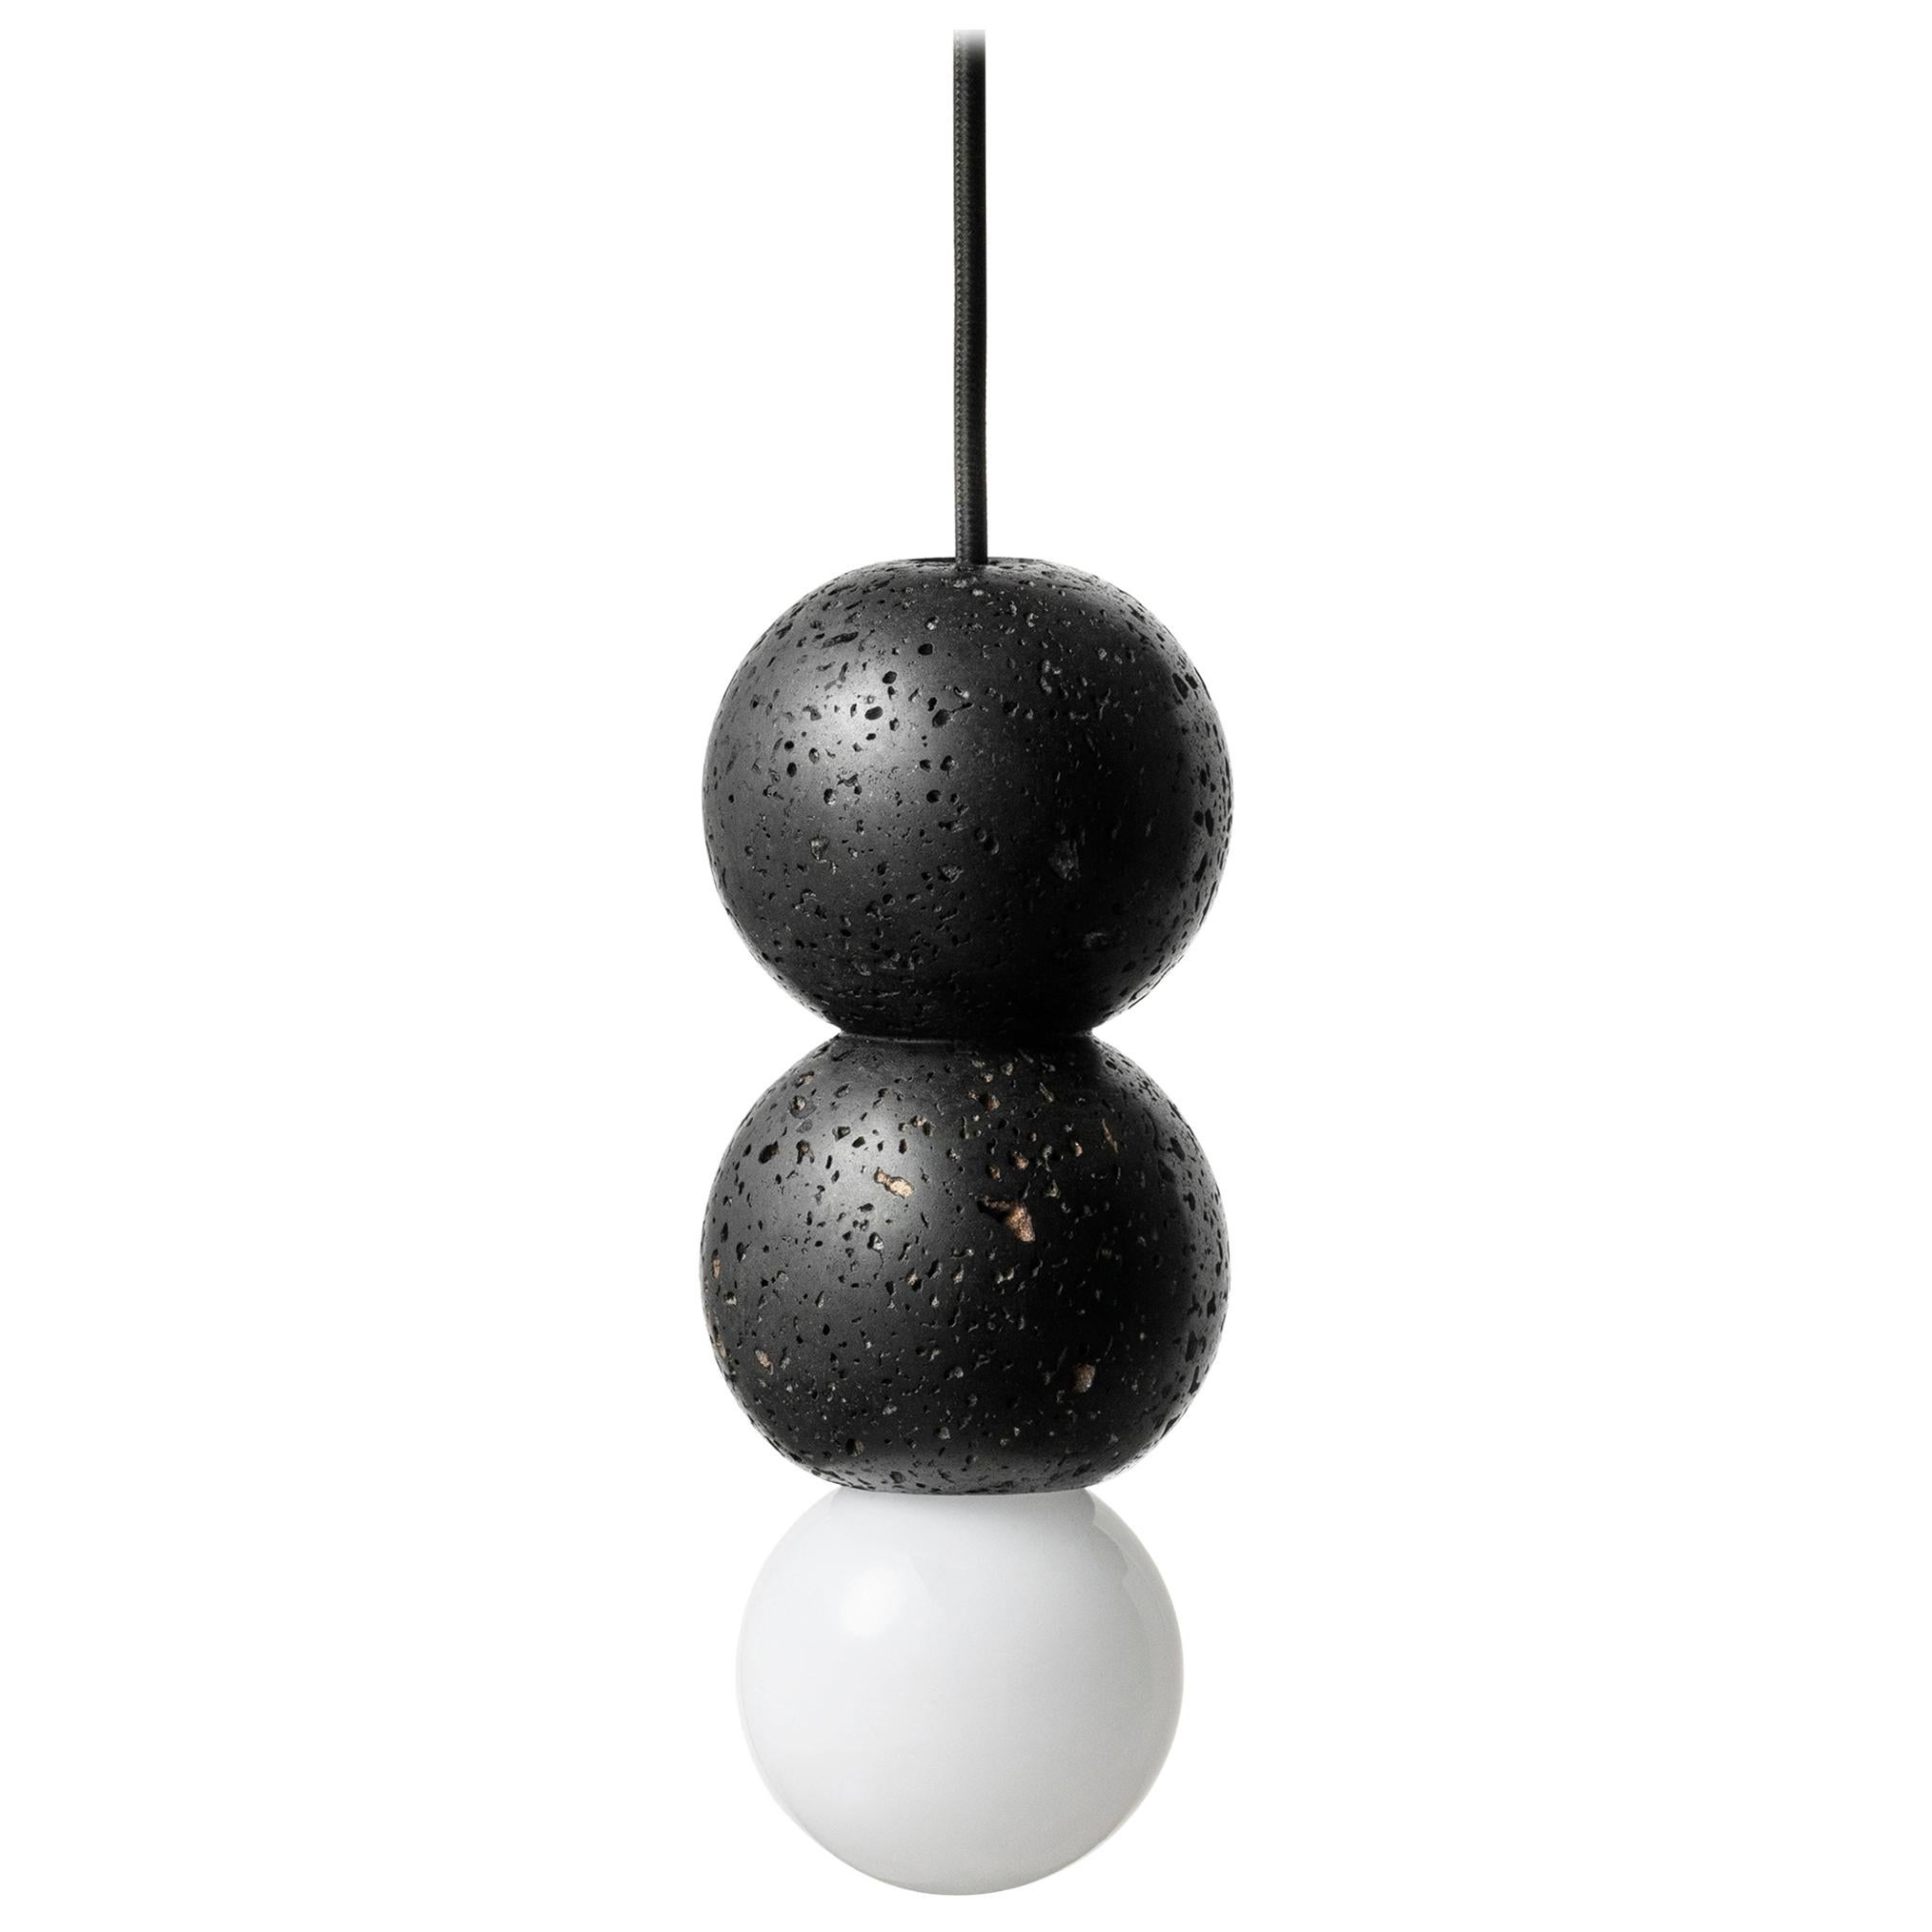 Lava Stone and Aluminum Pendant Light, “Ooops, ” by Buzao